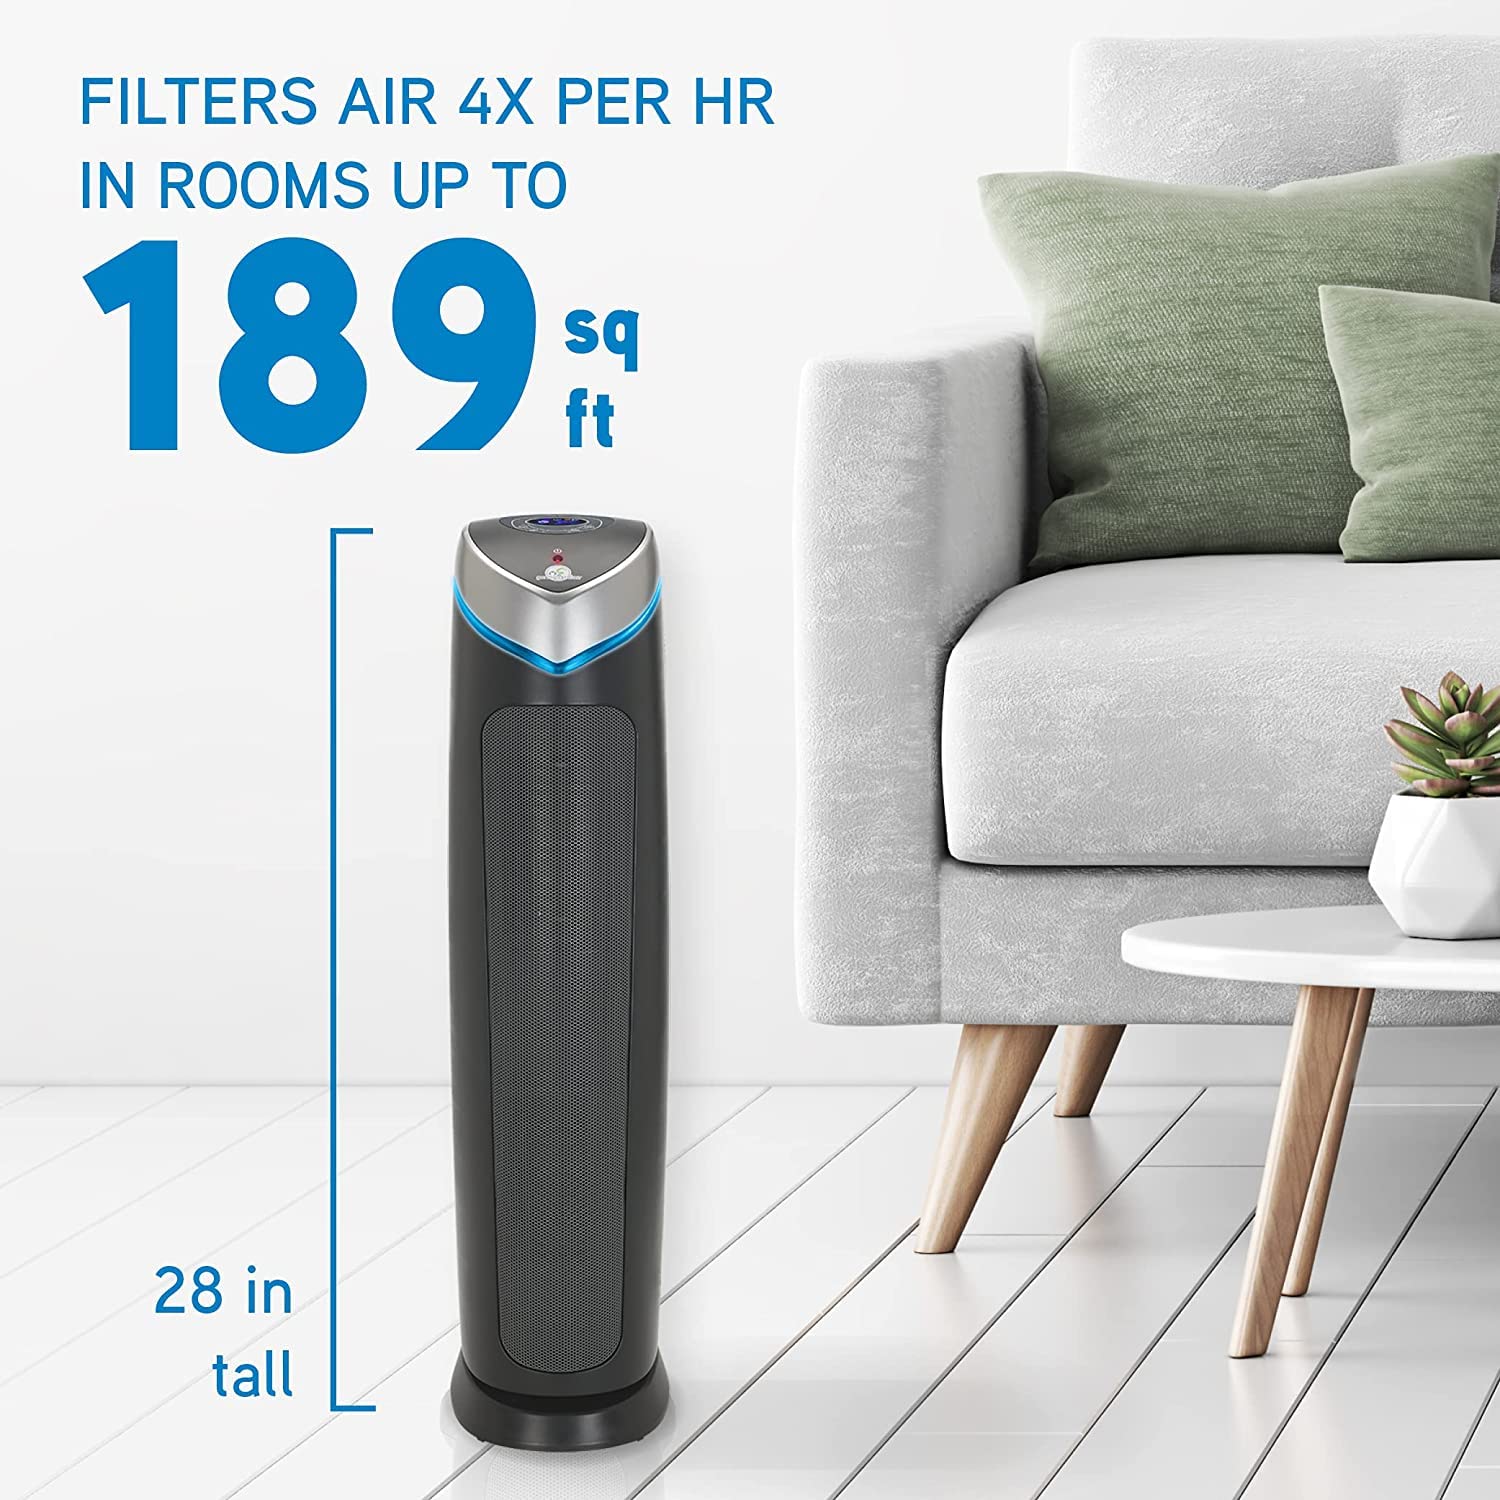 Germ Guardian Air Purifier with HEPA 13 Pet Filter, Removes 99.97% of Pollutants, Covers Large Room up to 915 Sq. Foot in 1 Hr, UV-C Light Helps Reduce Germs, Zero Ozone Verified, 28